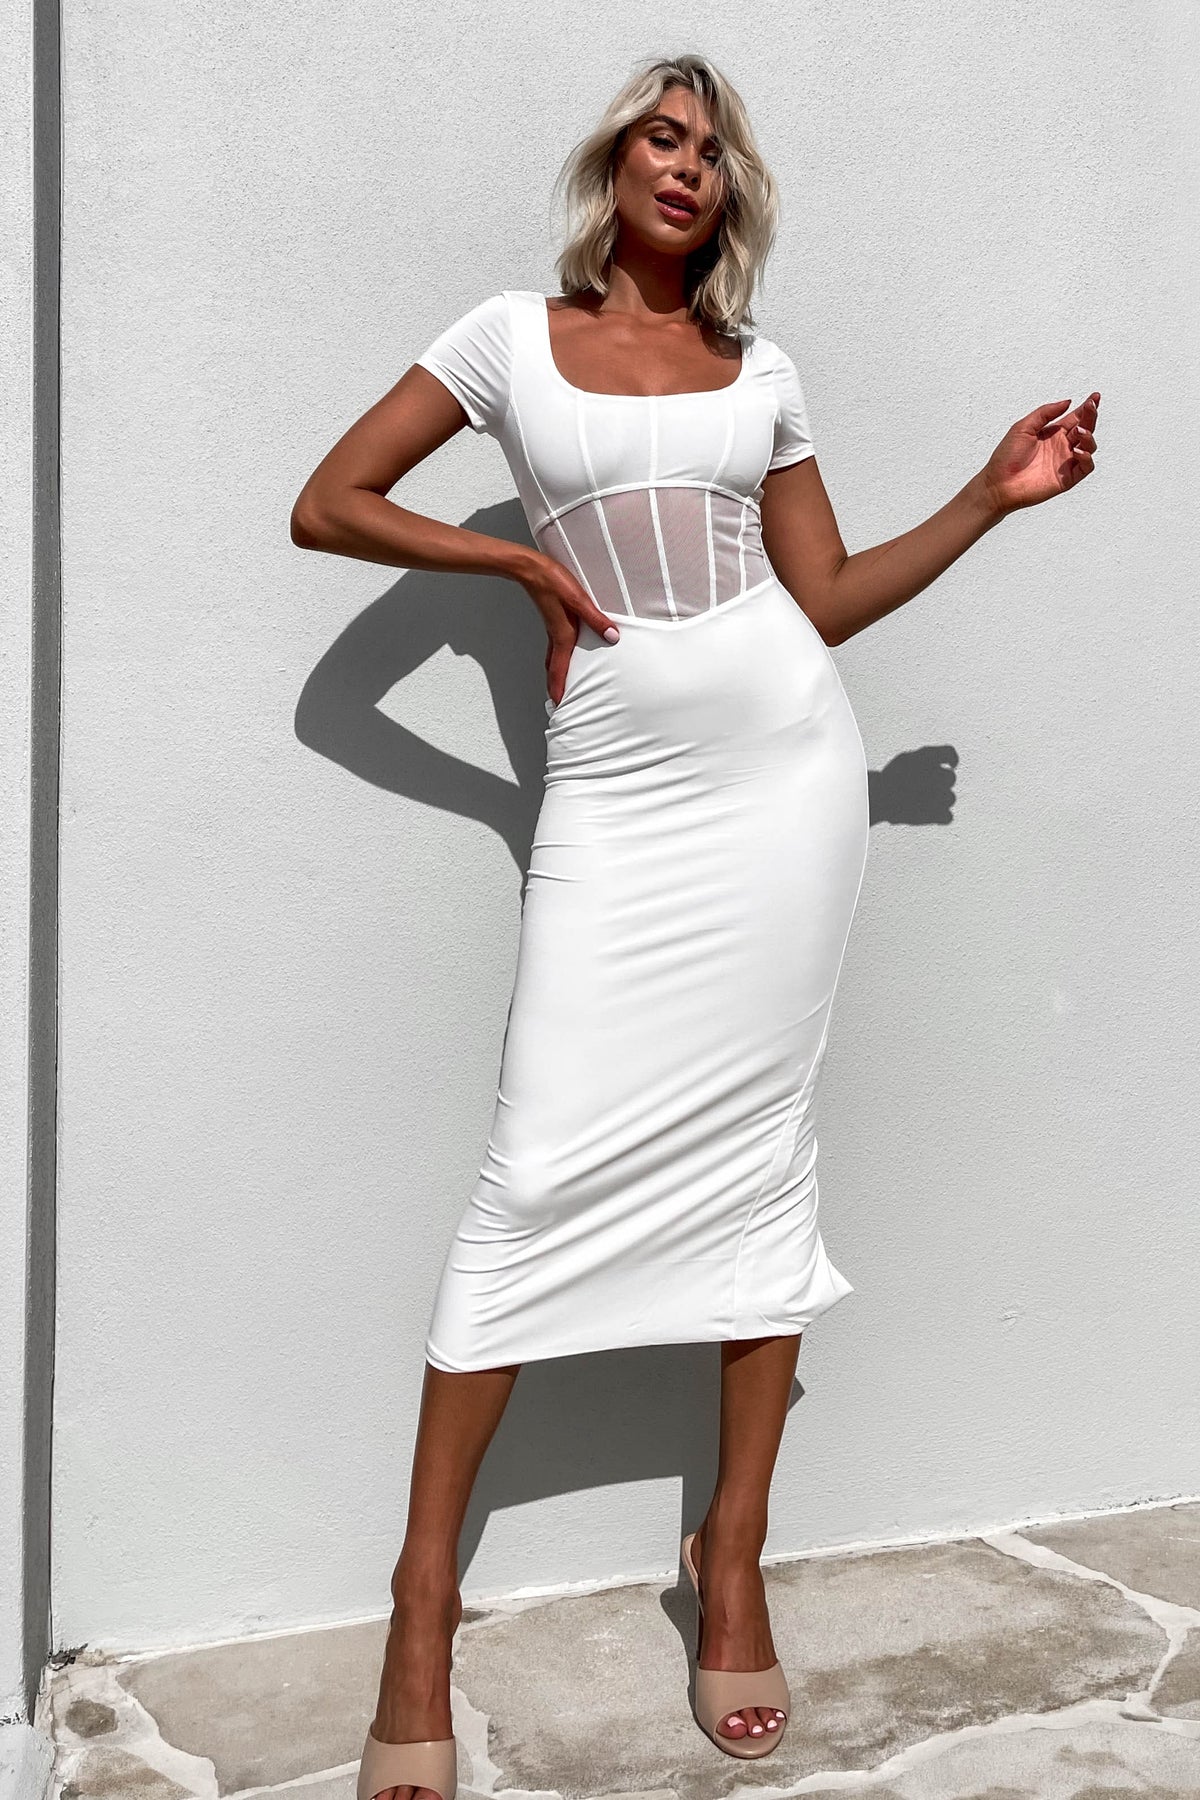 Tamias Dress, COTTON &amp; POLYESTER, COTTON AND POLYESTER, DRESS, DRESSES, MIDI DRESS, new arrivals, POLYESTER AND COTTON, WHITE, , -MISHKAH